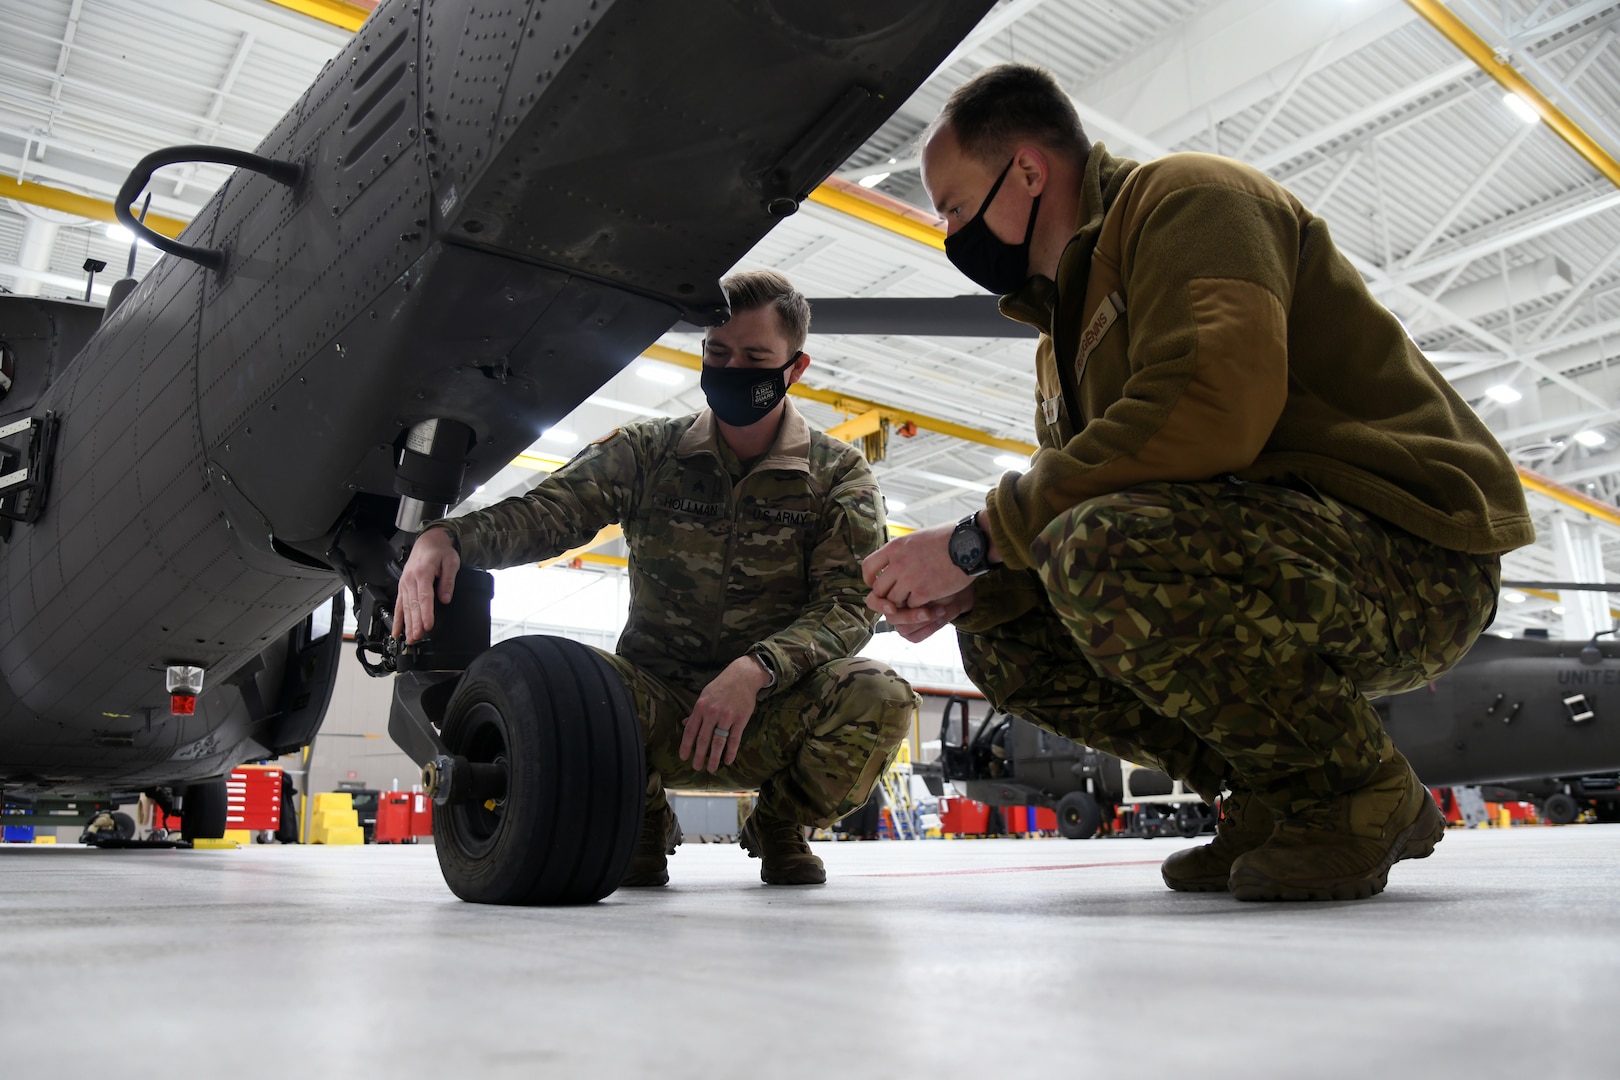 U.S. Army Sgt. Zach Hollman, UH-60 crew chief, Company B, 147th Aviation Regiment, Michigan Army National Guard (MIARNG), and Latvian Air Force Capt. Raimonds Lugēņins inspect landing gear on a Black Hawk Dec. 1, 2021, at Grand Ledge, Mich. The MIARNG is providing training for the first Latvian UH-60 maintainer after the country purchased four Black Hawk helicopters.